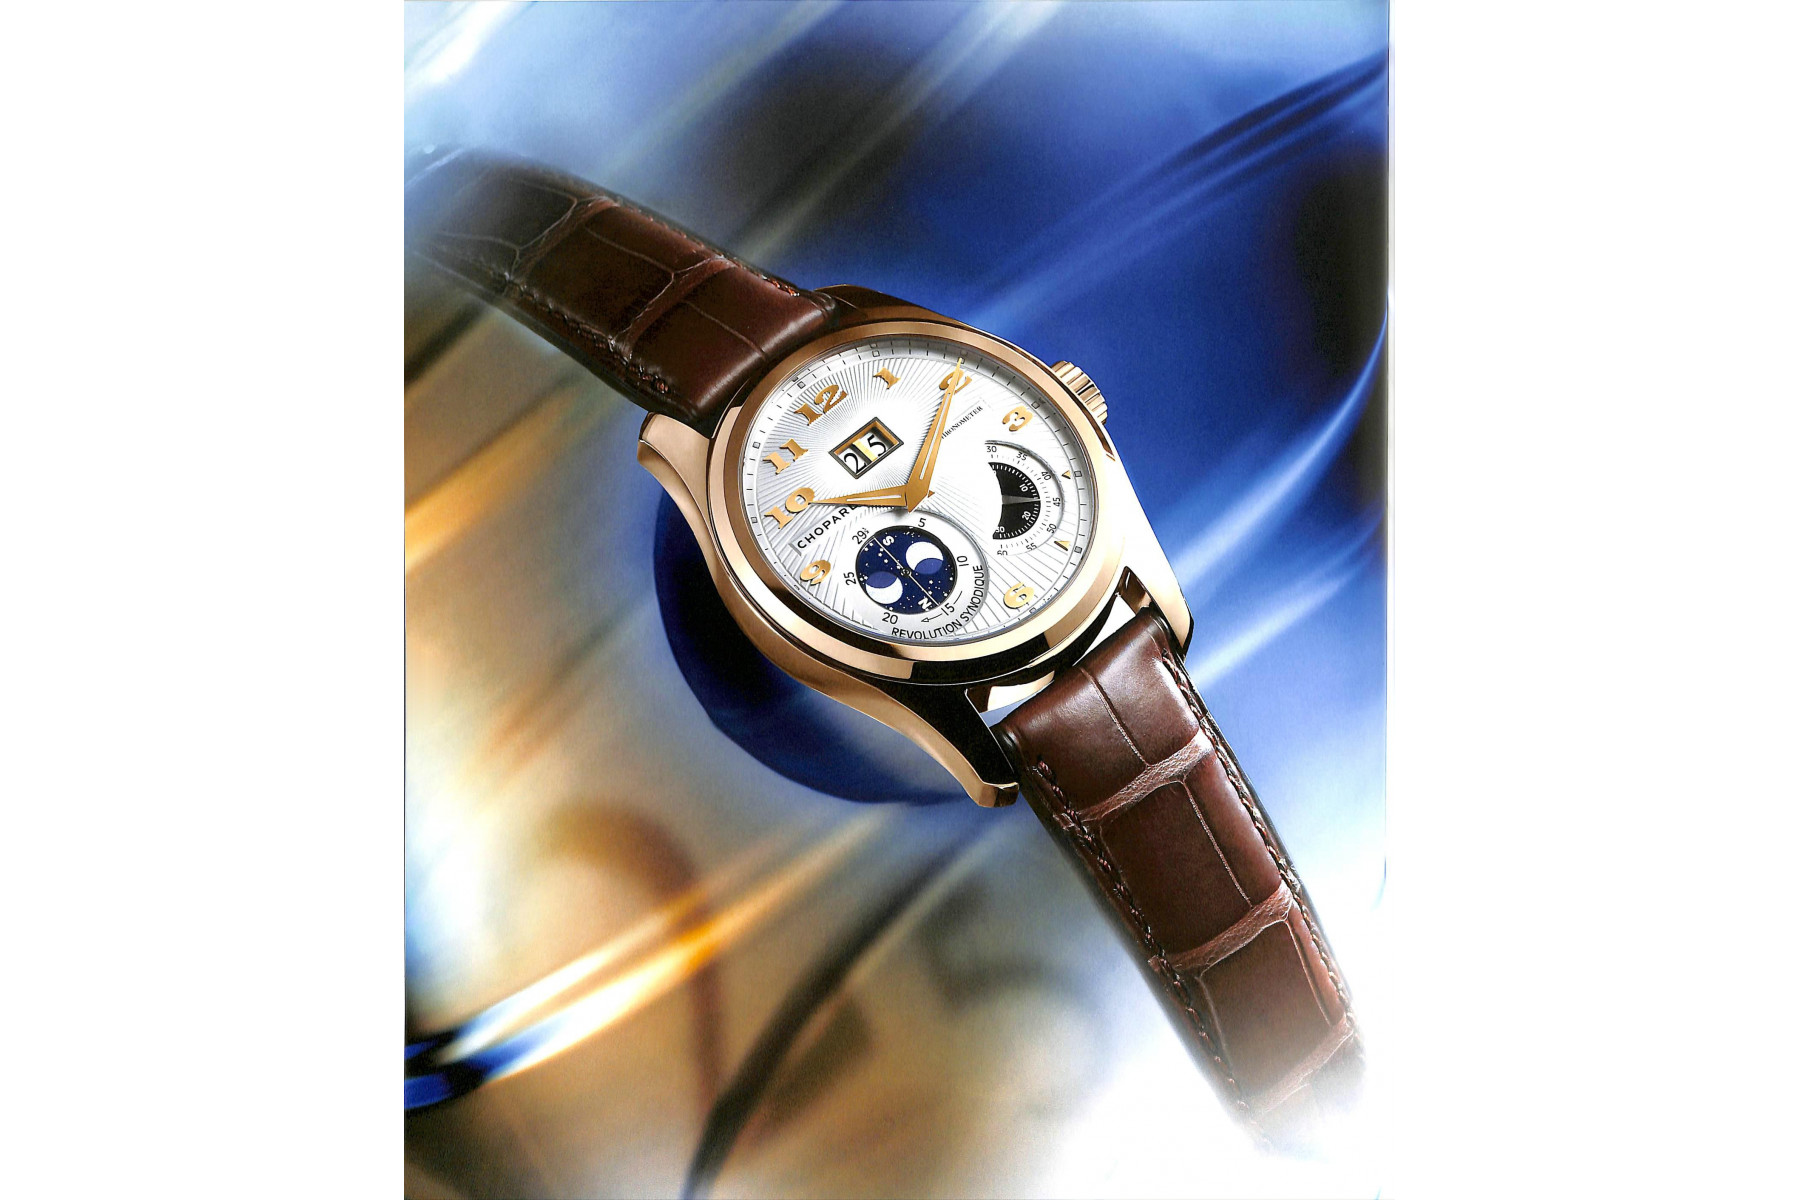 Chopard - The Passion For Excellence (German)